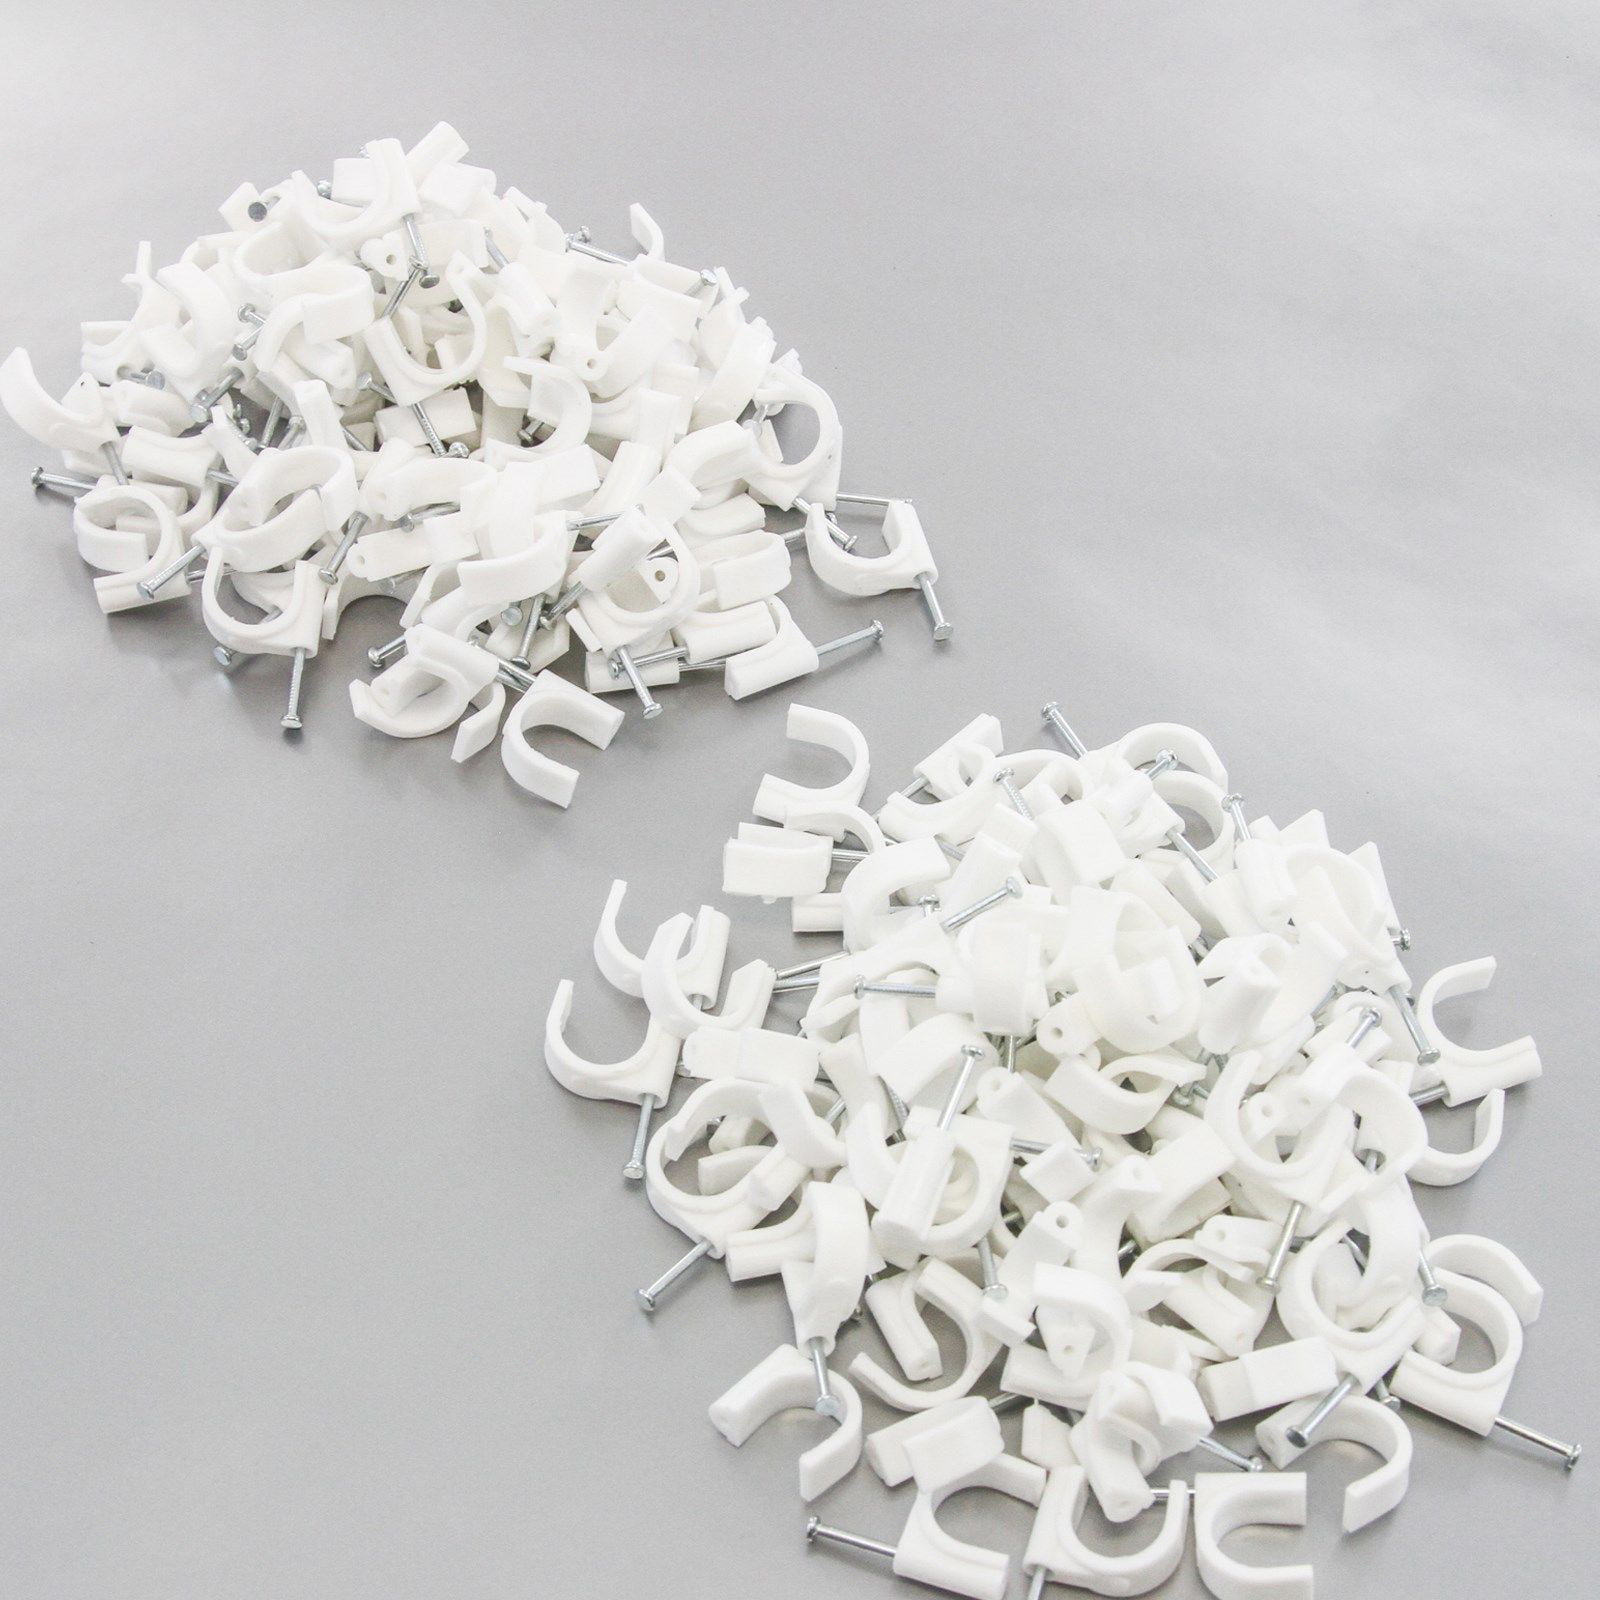 XLX 100pcs White Nylon R-Type Cable Clamp Fastener for 6.35mm Dia Wire Tube Plastic Wire Cord Clip Fixer with 100 Pack Screws for Wire Management 1/4